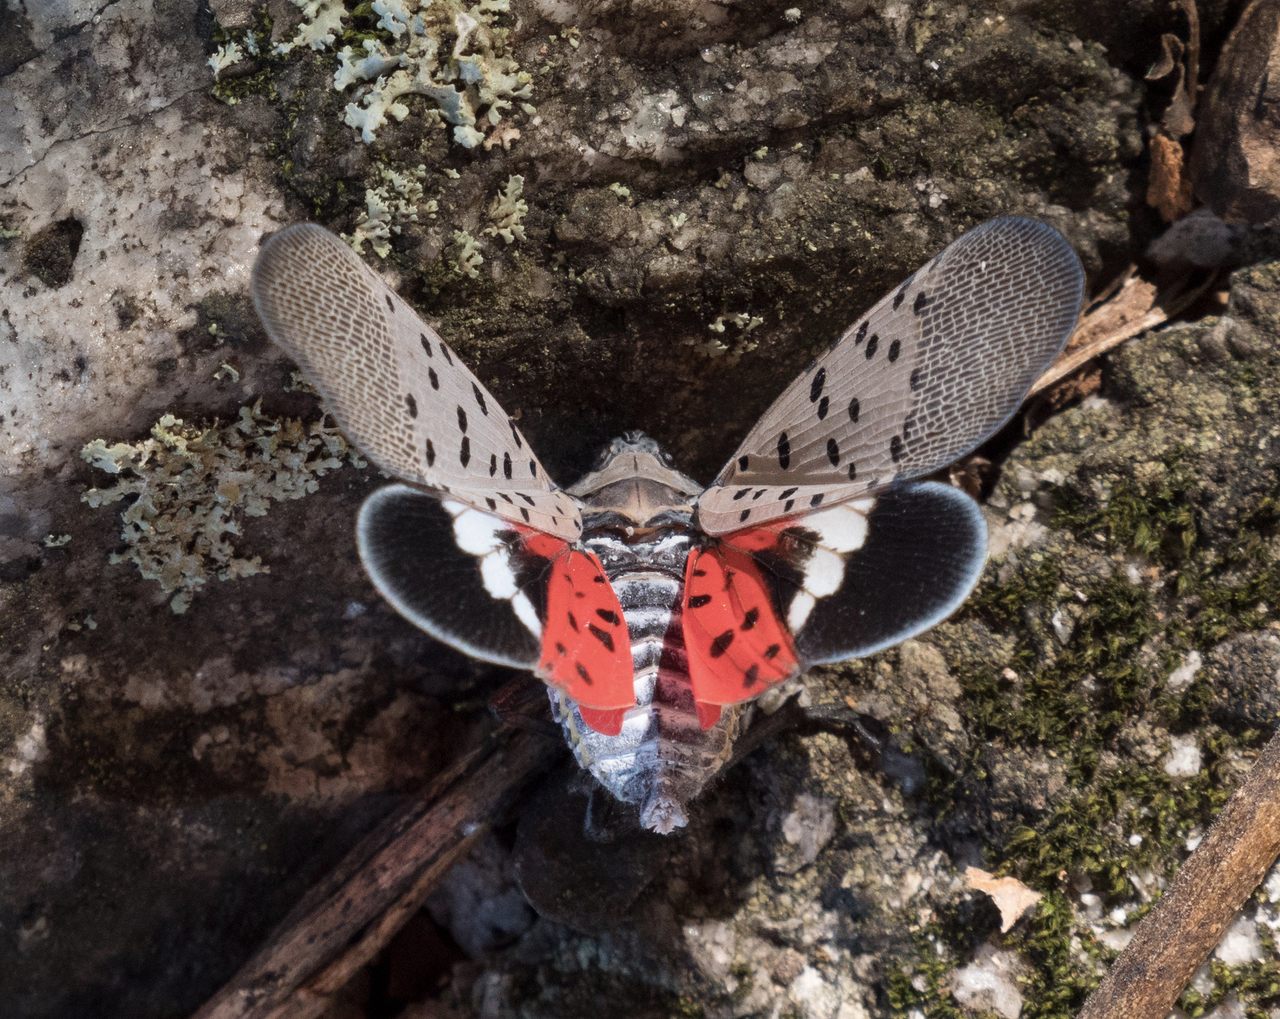 The spotted lanternfly has no natural predators in the United States.